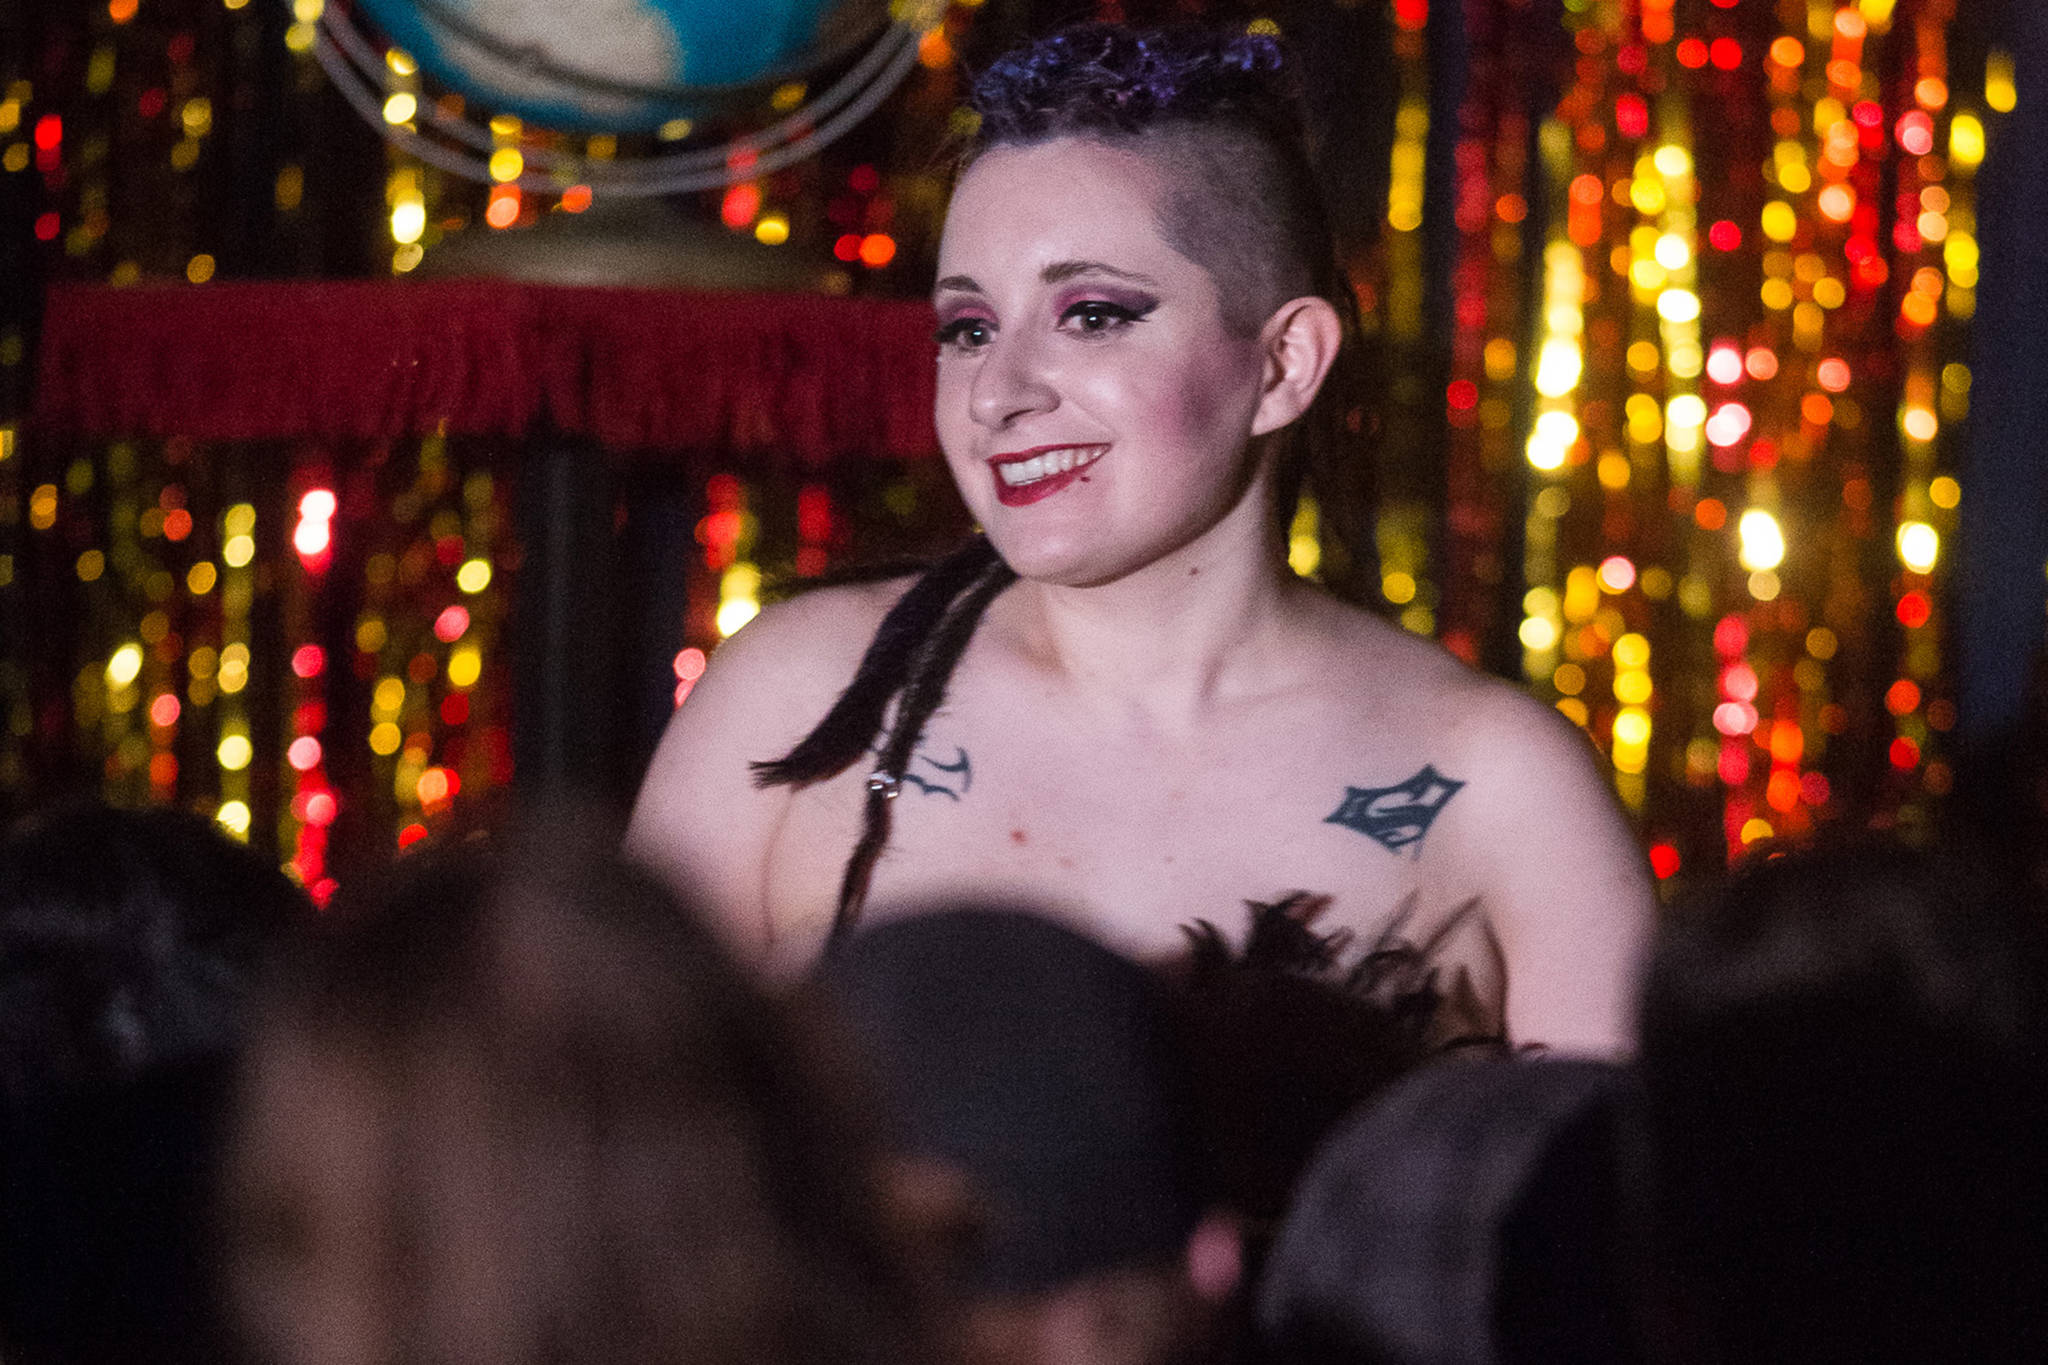 Juneau’s burlesque troupe expects busy nude year